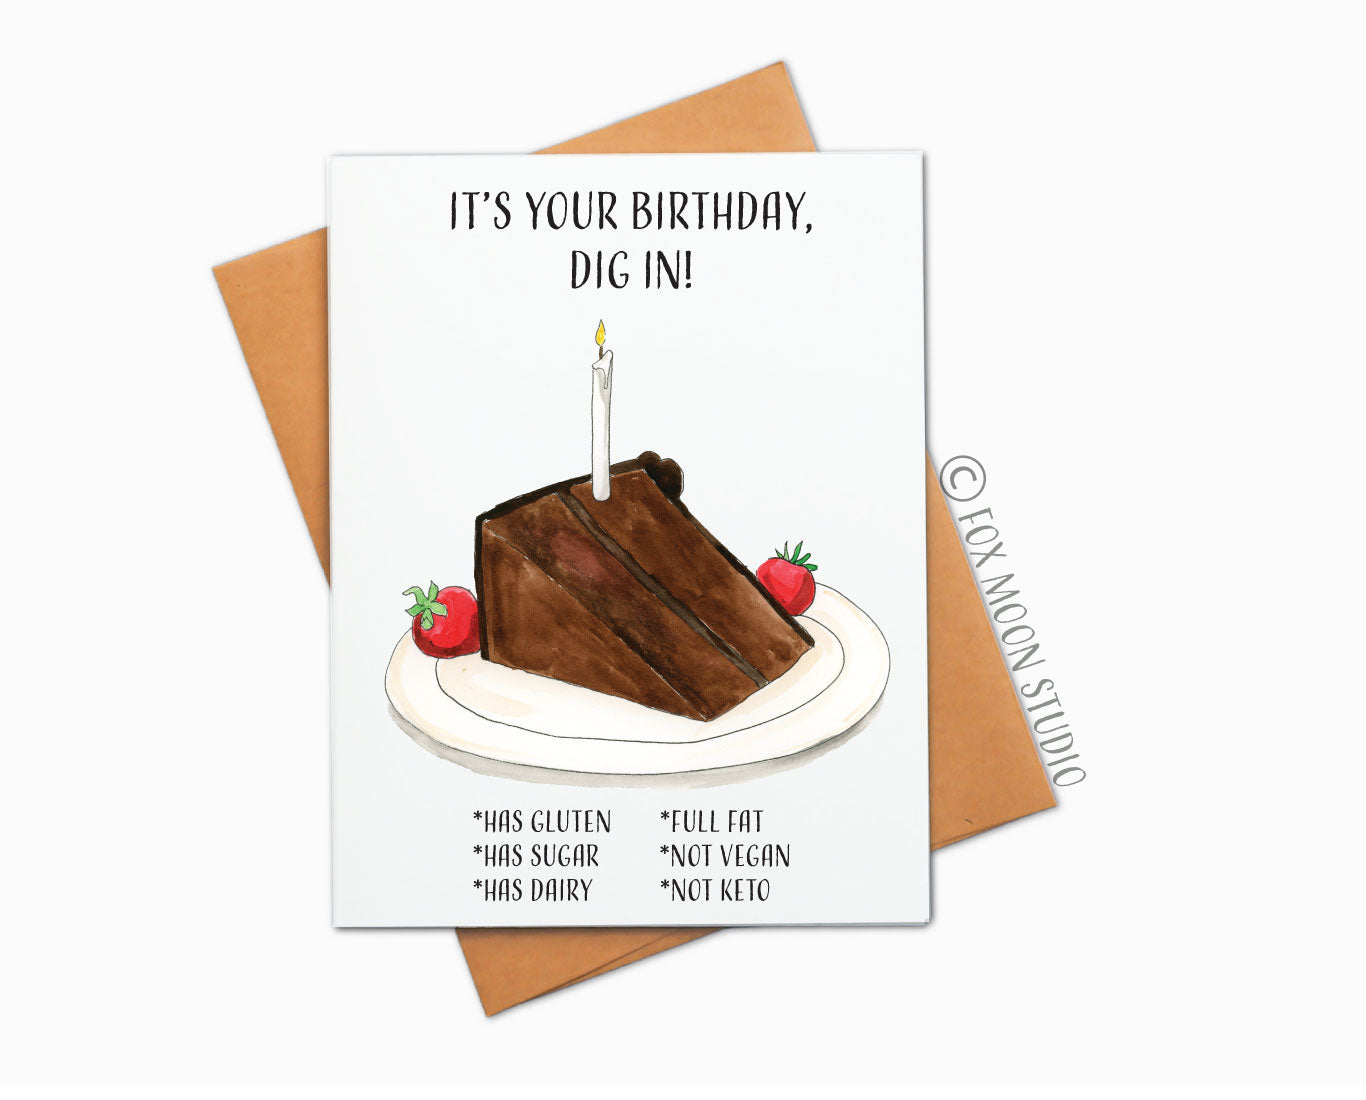 It's Your Birthday, Dig In! - Foodie Humor Birthday Greeting Card